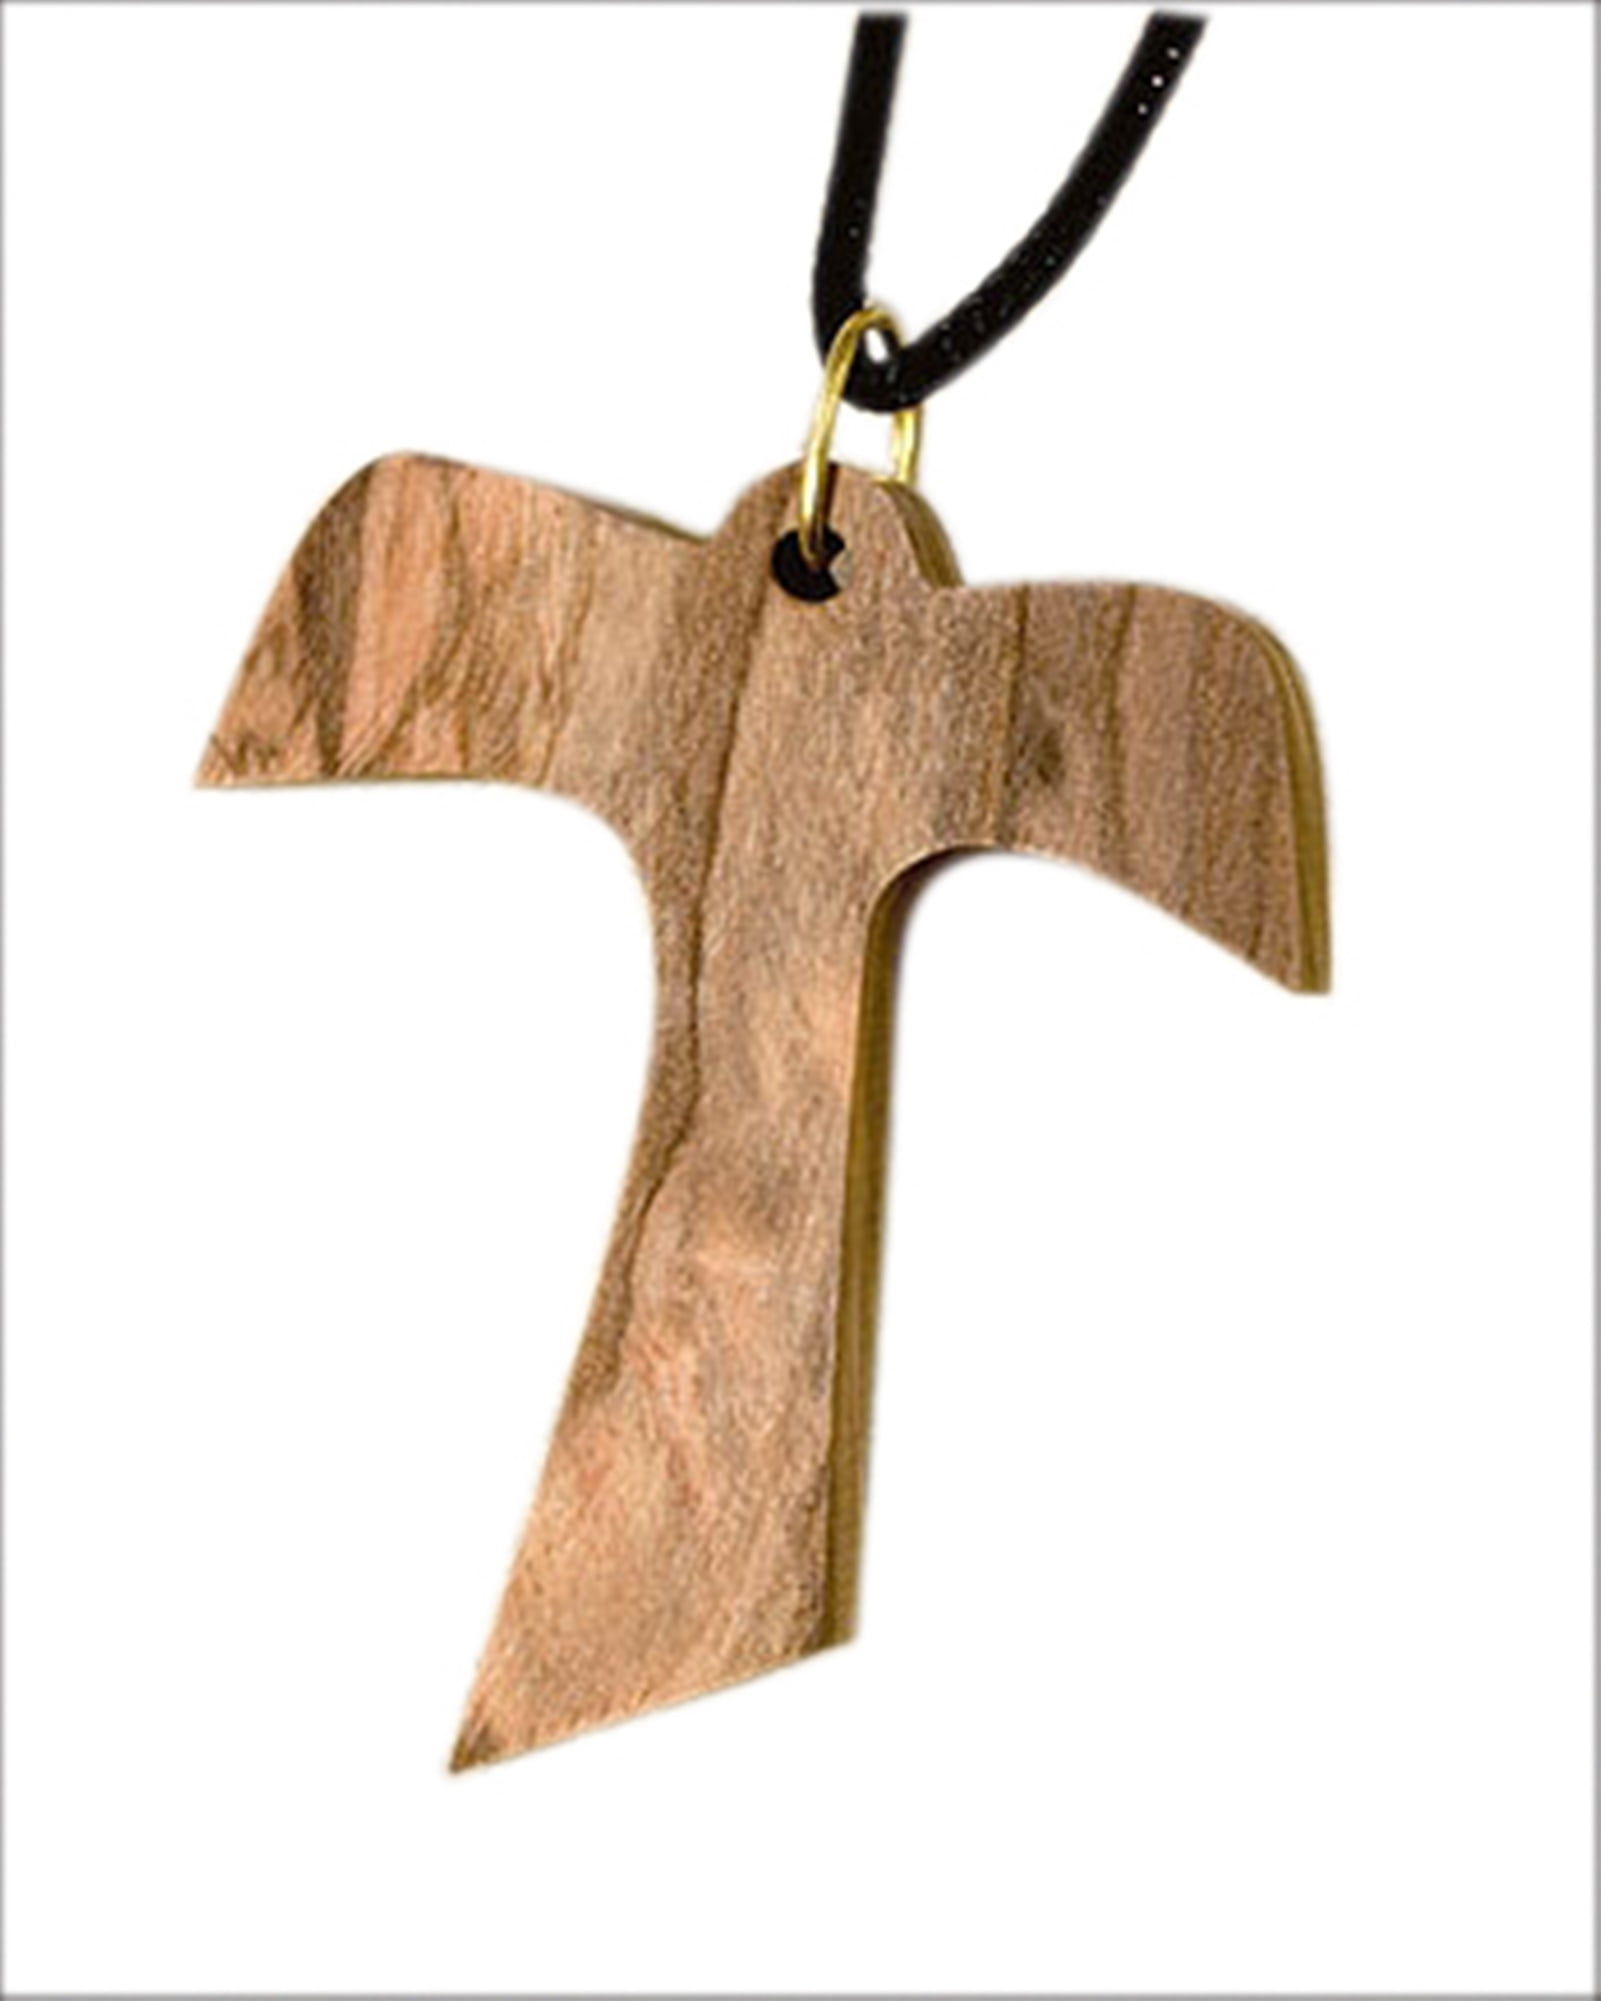 27 Inch Made in Bethlehem 1 1/2 Inch Tau Cross Pendant with Rope Chain Necklace